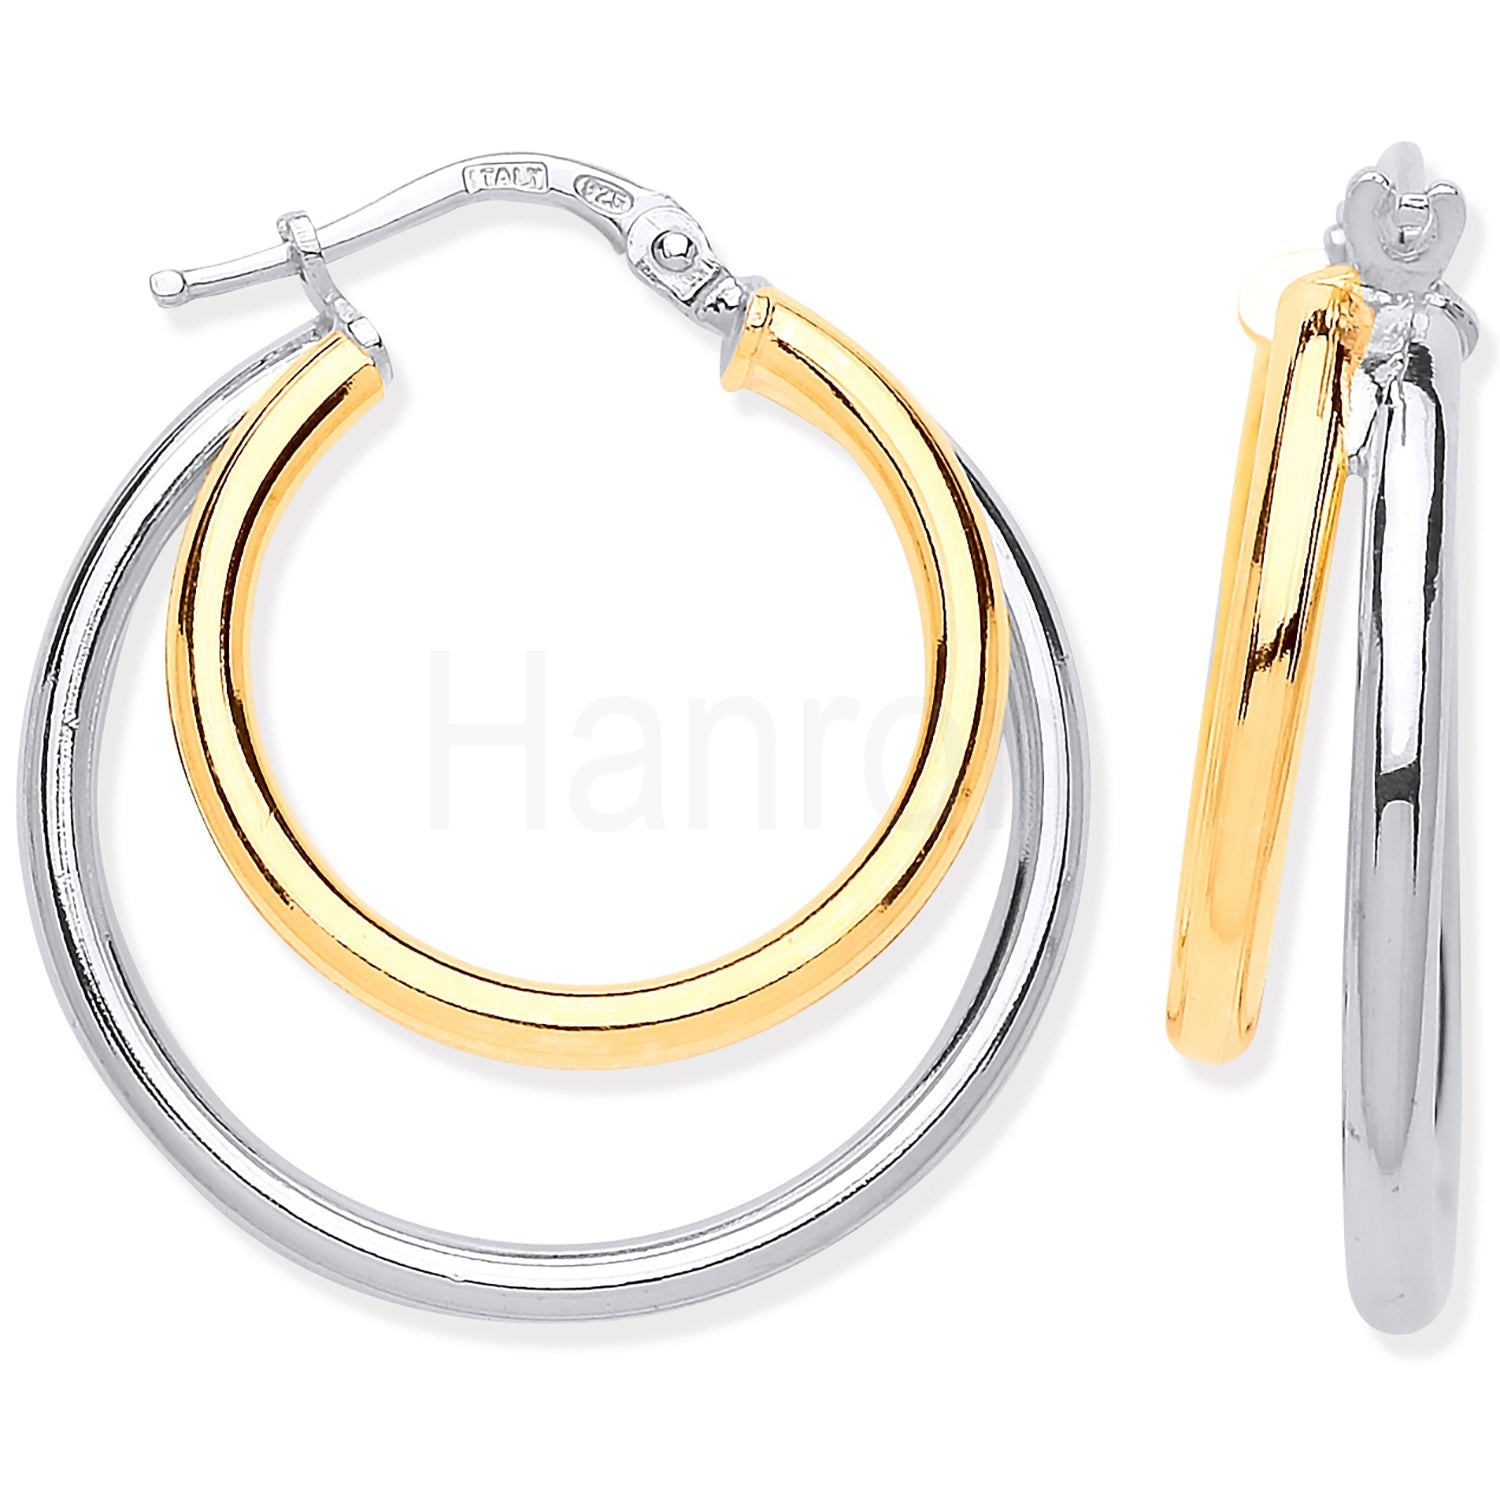 Silver & YG Plated Double Circle Polished Hoop Earrings